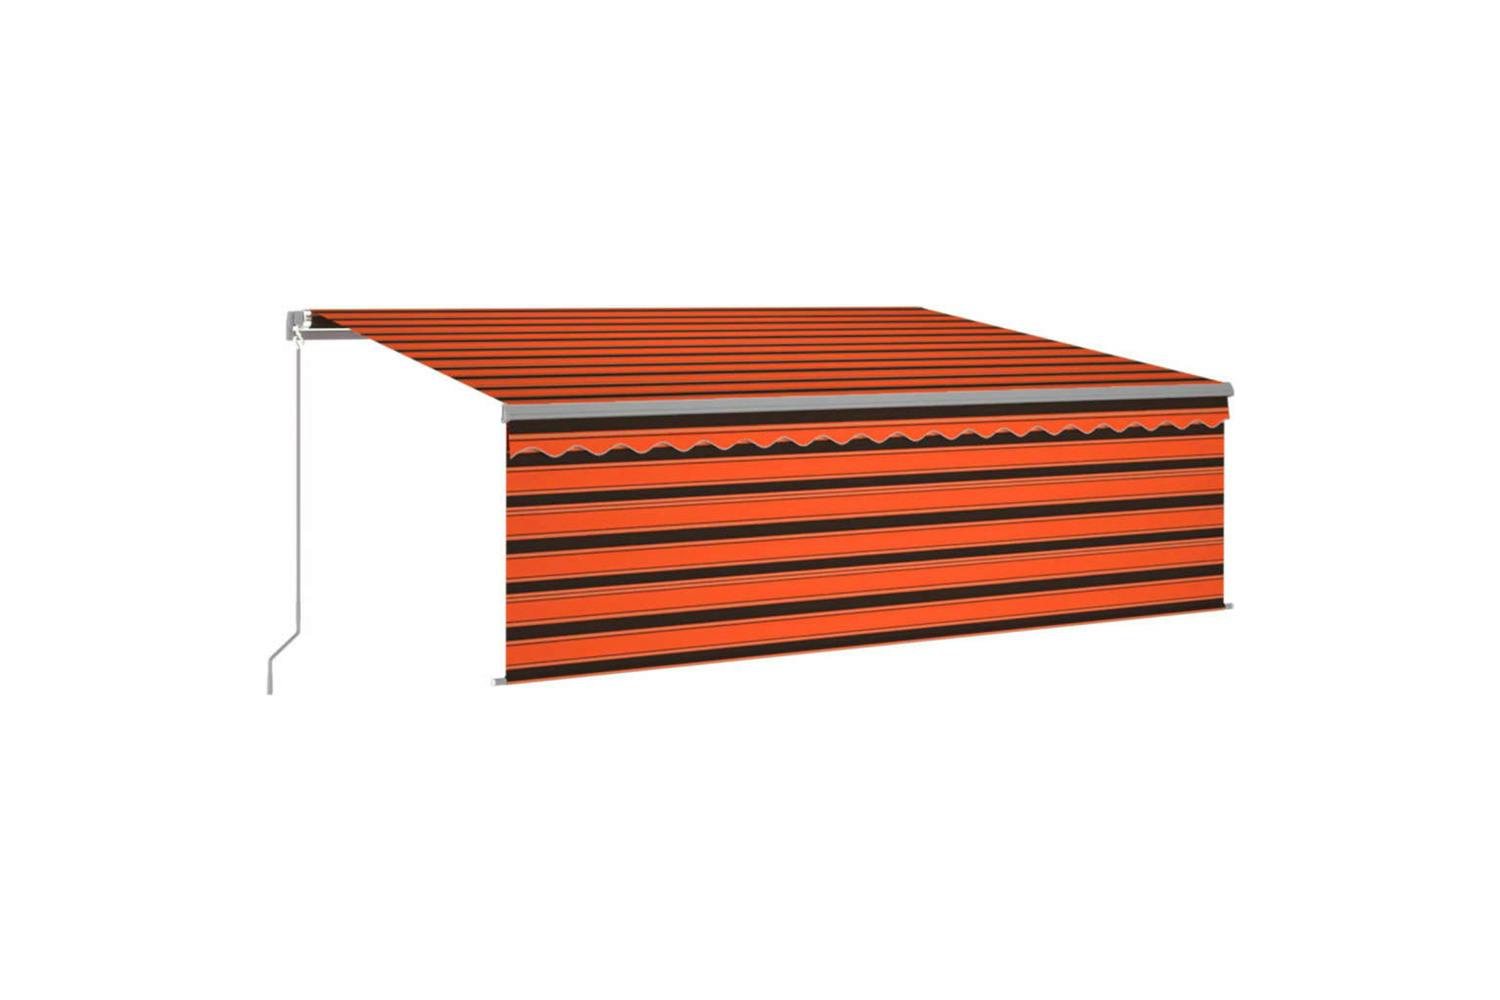 Vidaxl 3069420 Manual Retractable Awning With Blind 4x3m Orange&brown